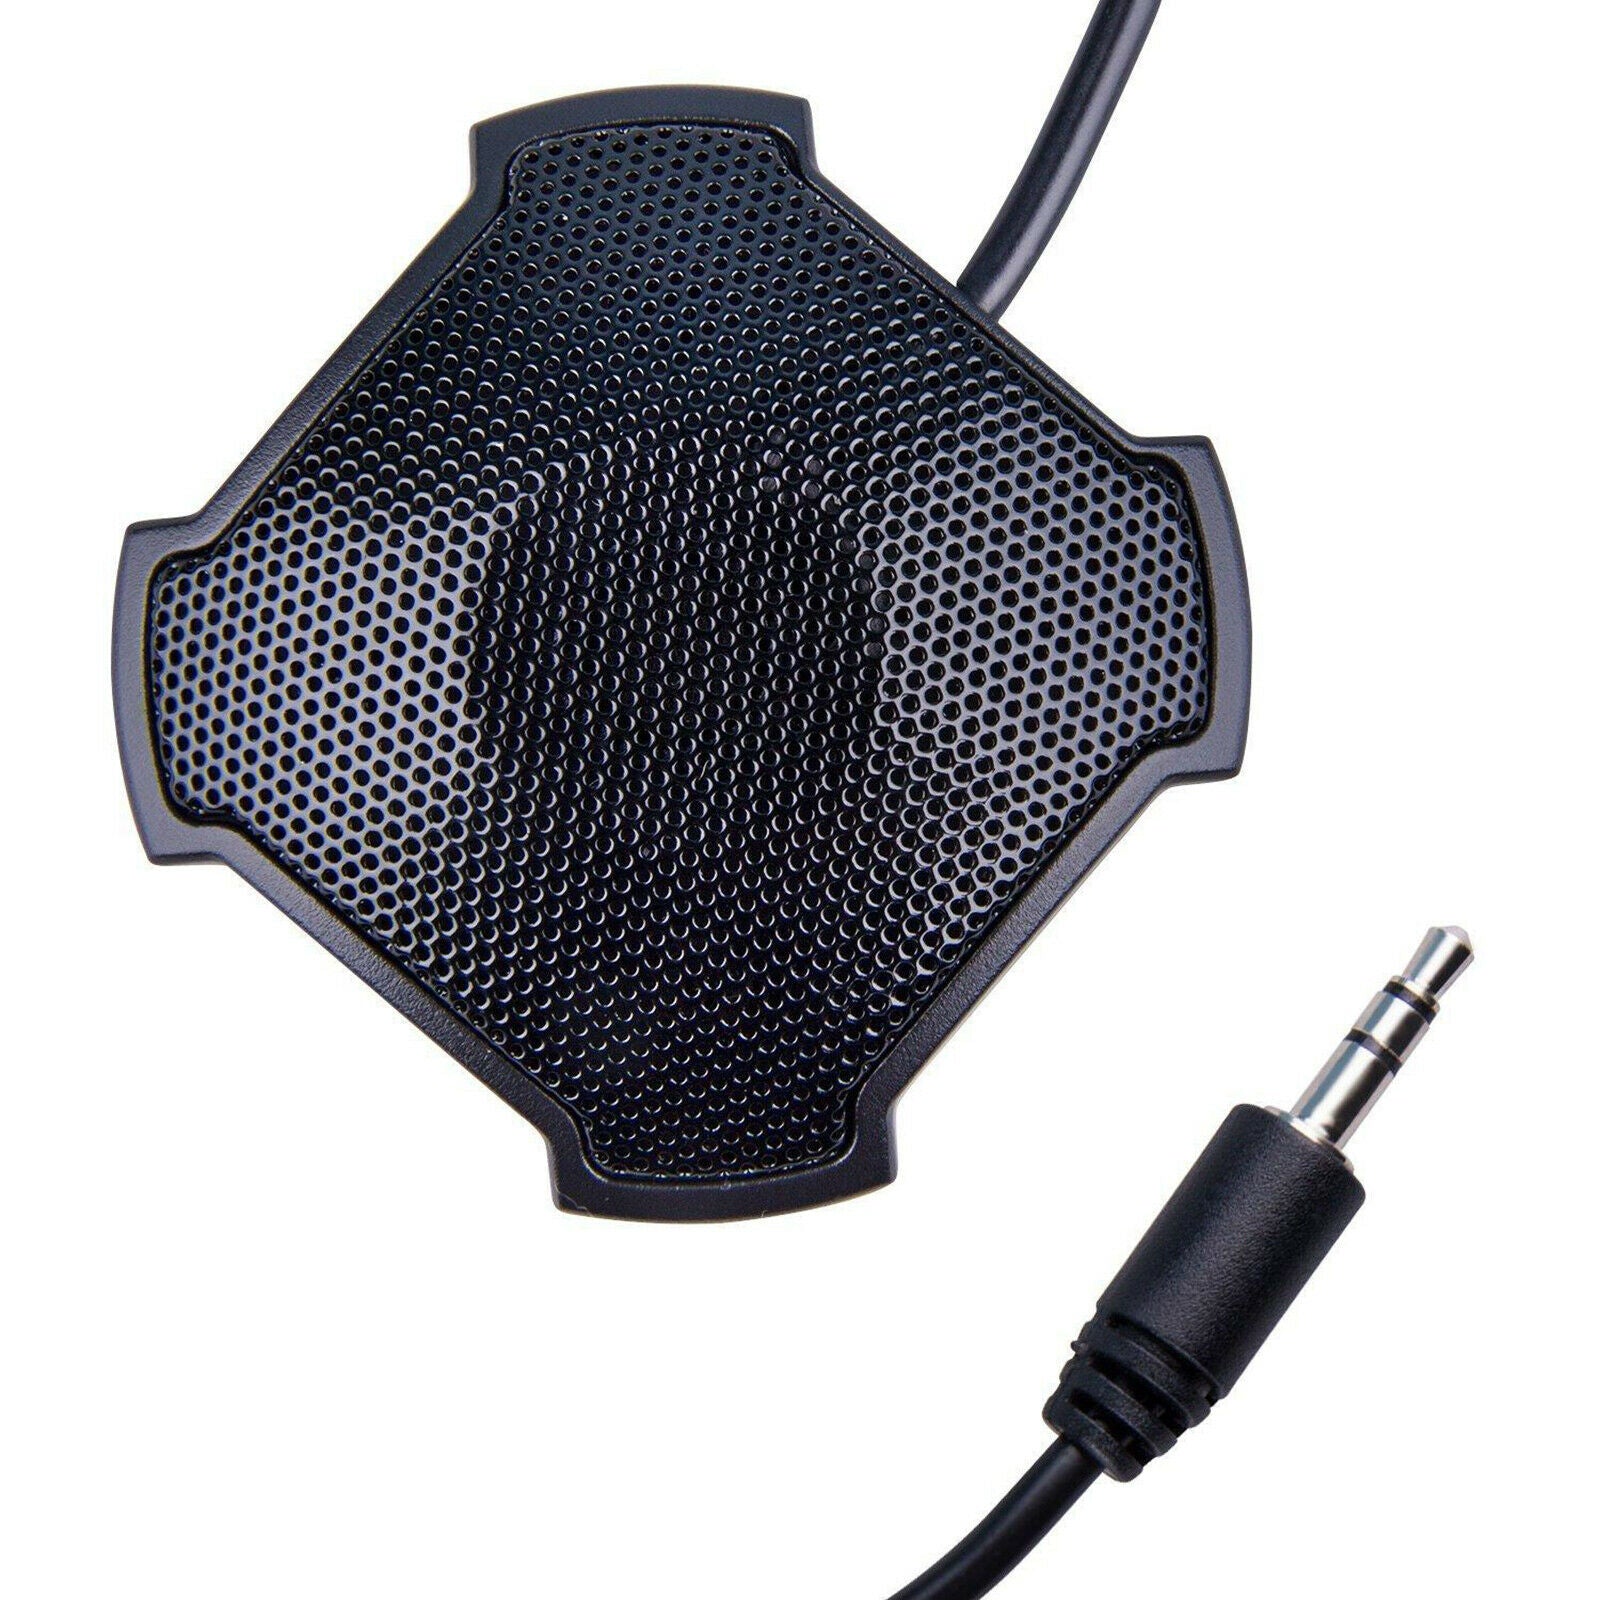 Conference 3.5mm Microphone, Omnidirectional Condenser PC Mic for Video